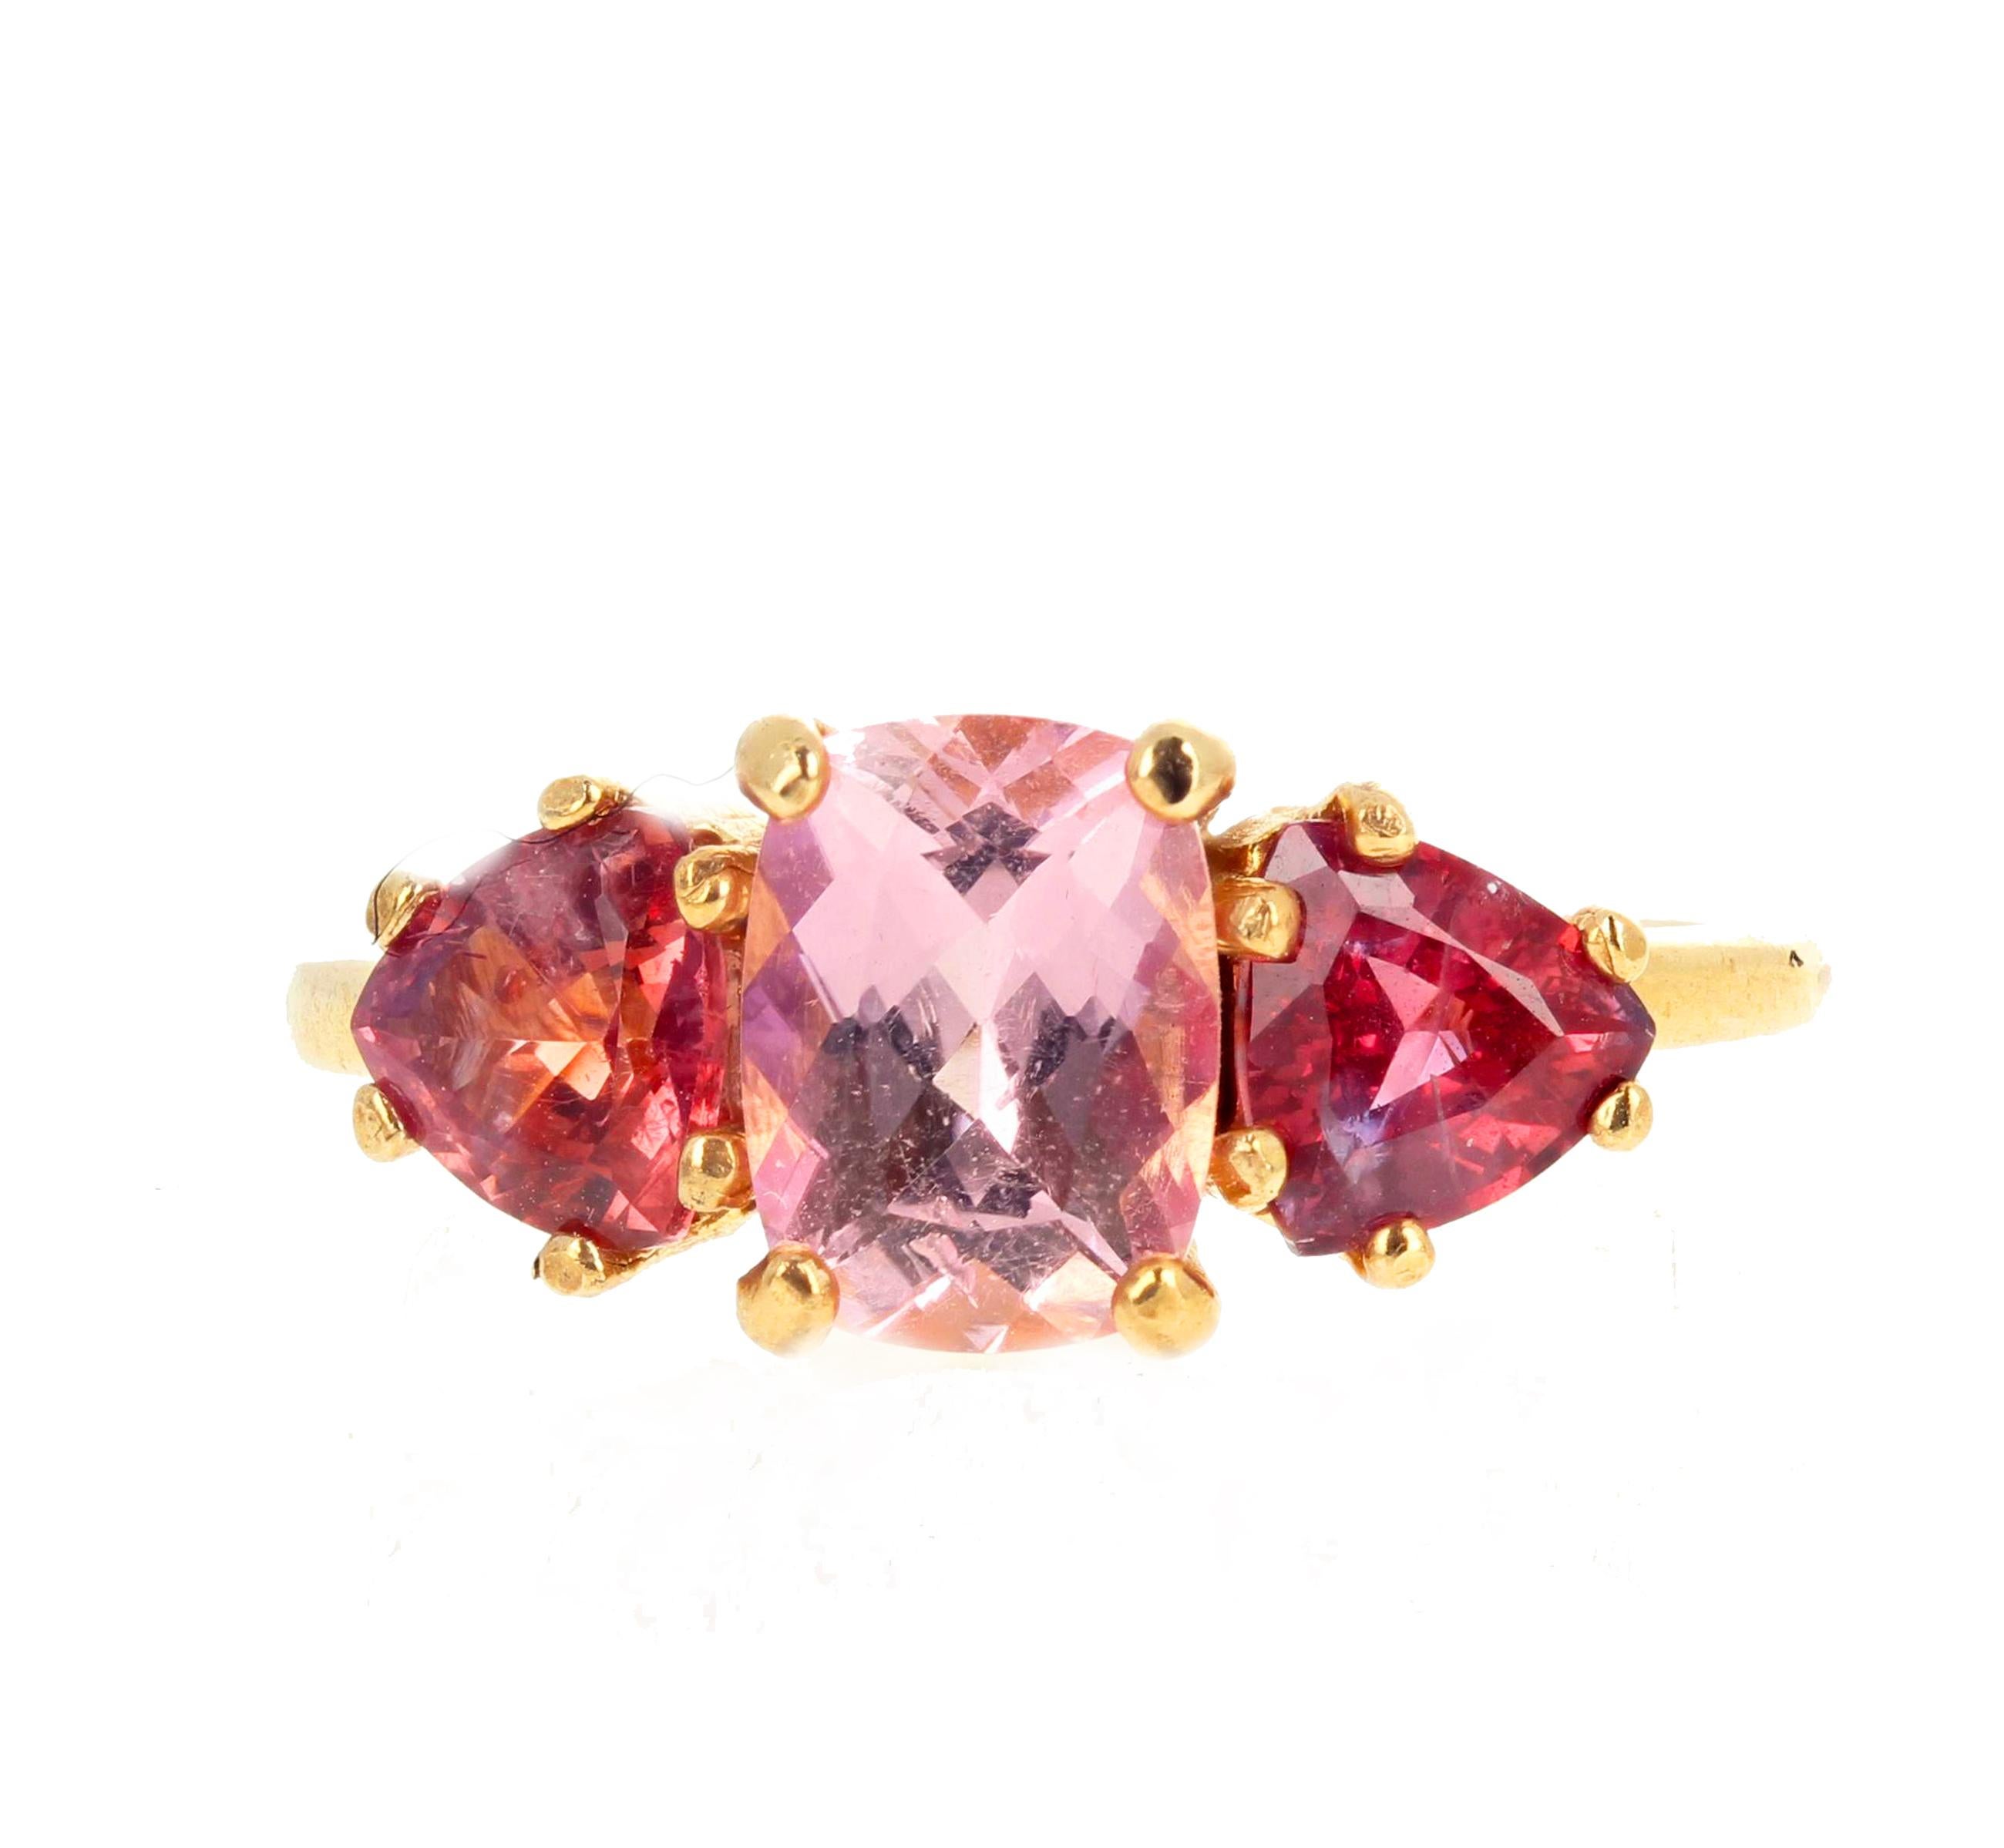 Gemjunky Exotic Three Stone Pink Tourmaline & Red Spinel 14 Kt Yellow Gold Ring 1